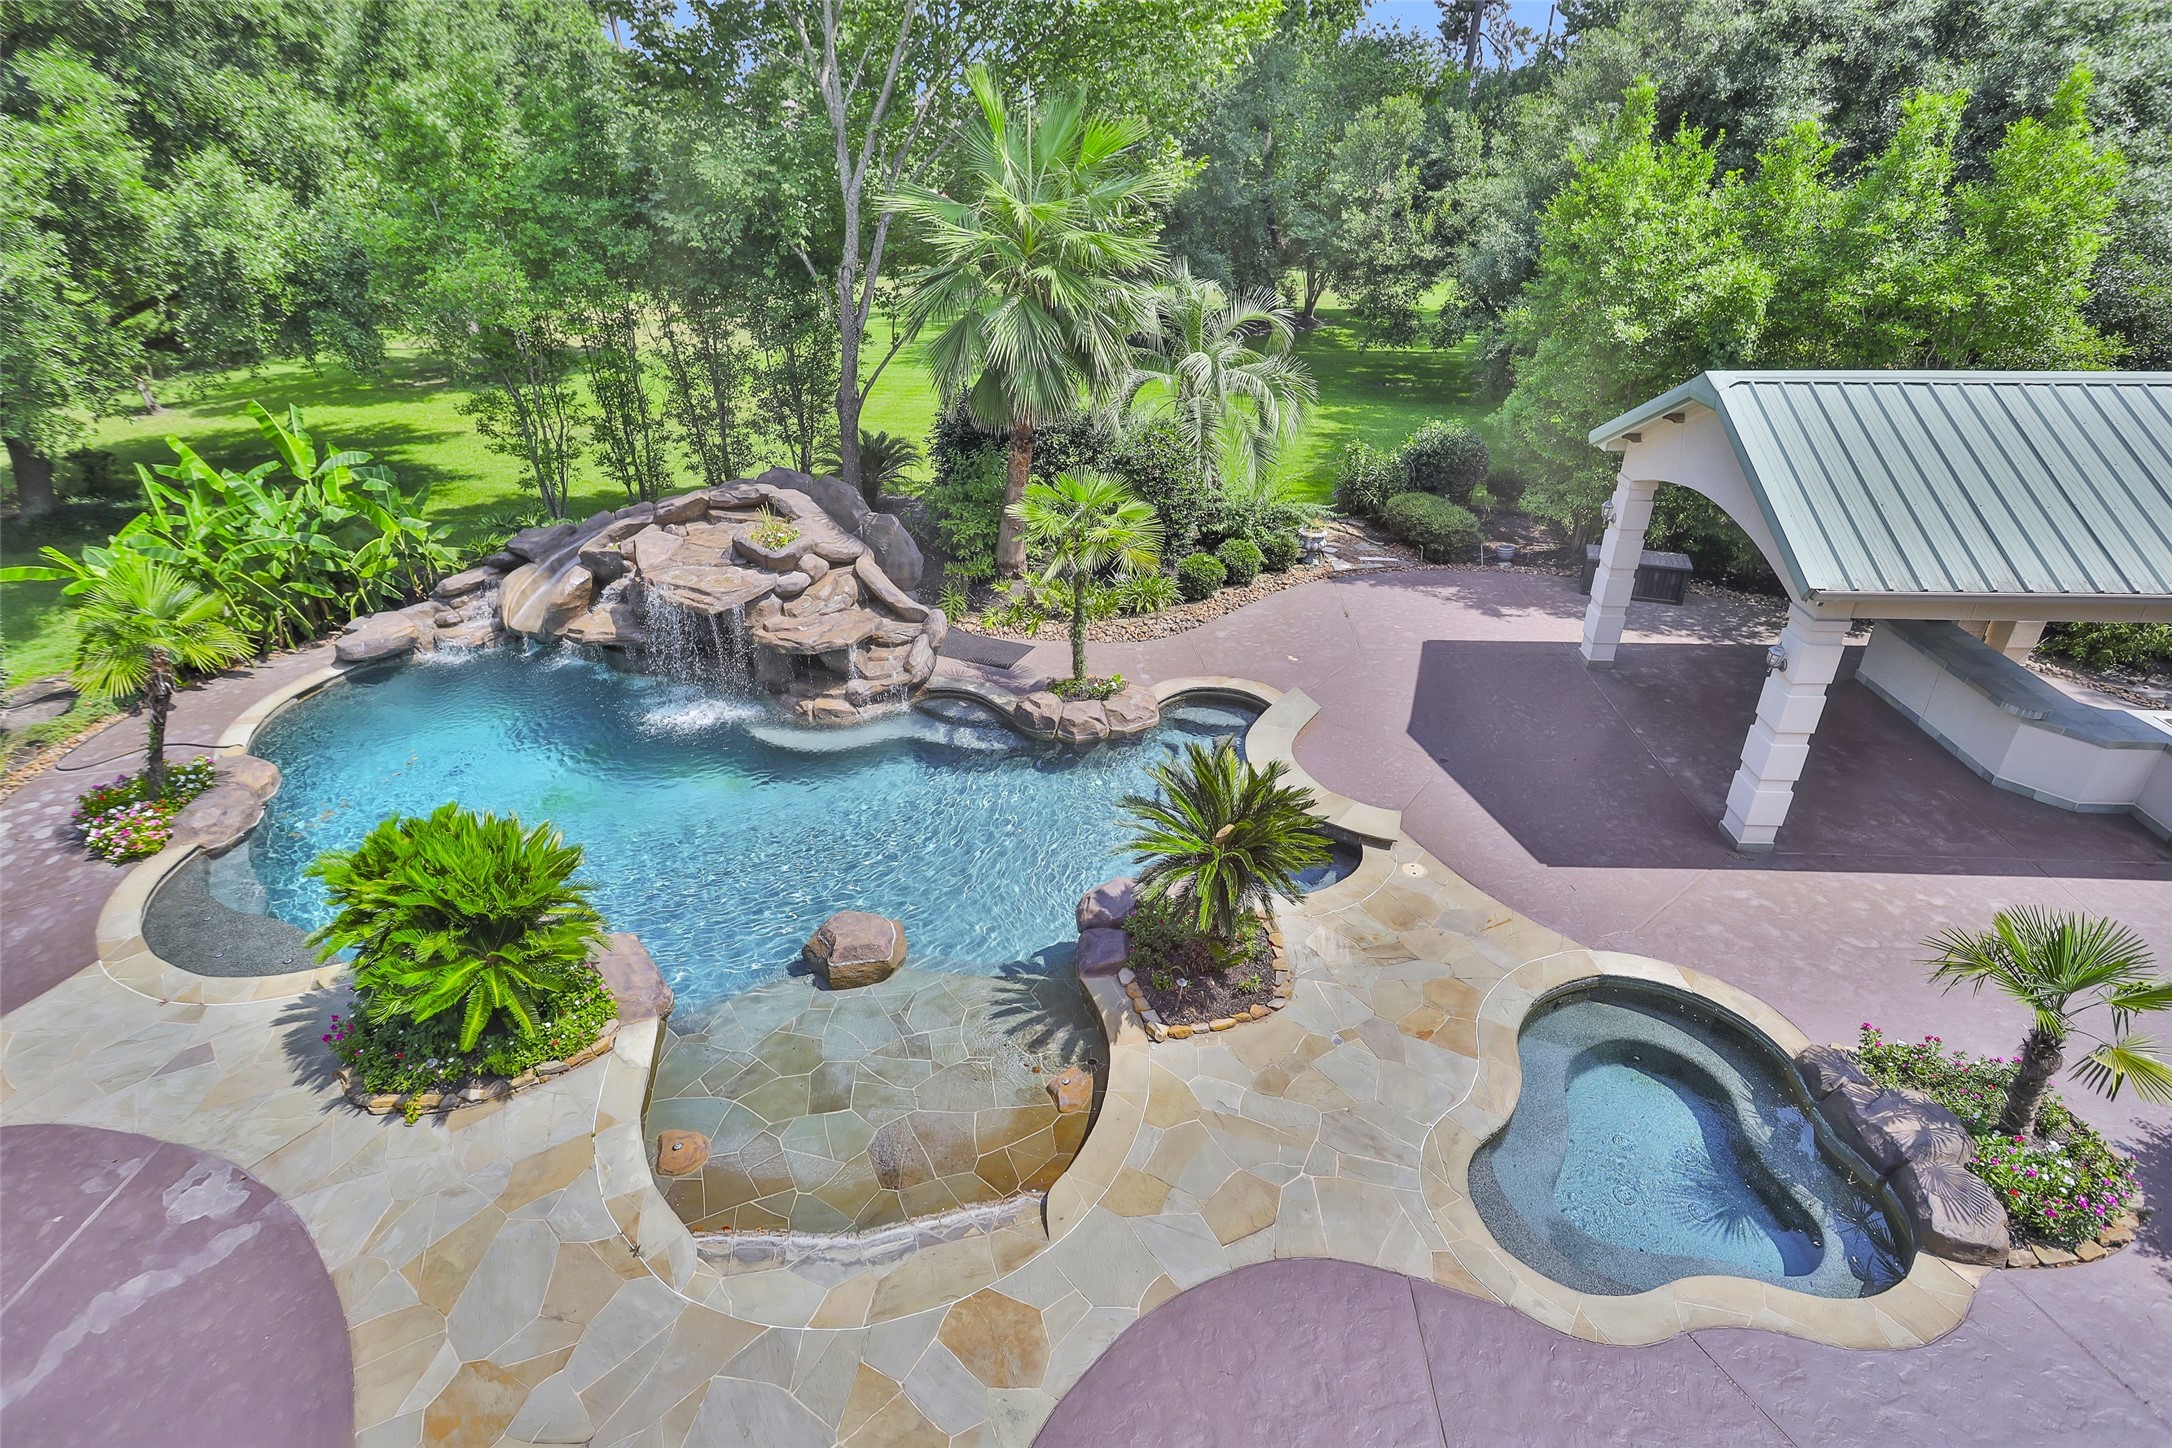 Ultra private Classic Italian style pool home on wooded 1.89-acres cul-de-sac in gated enclave of estate homes w/ private fishing lakes, walking trails & lakeside gazebos.